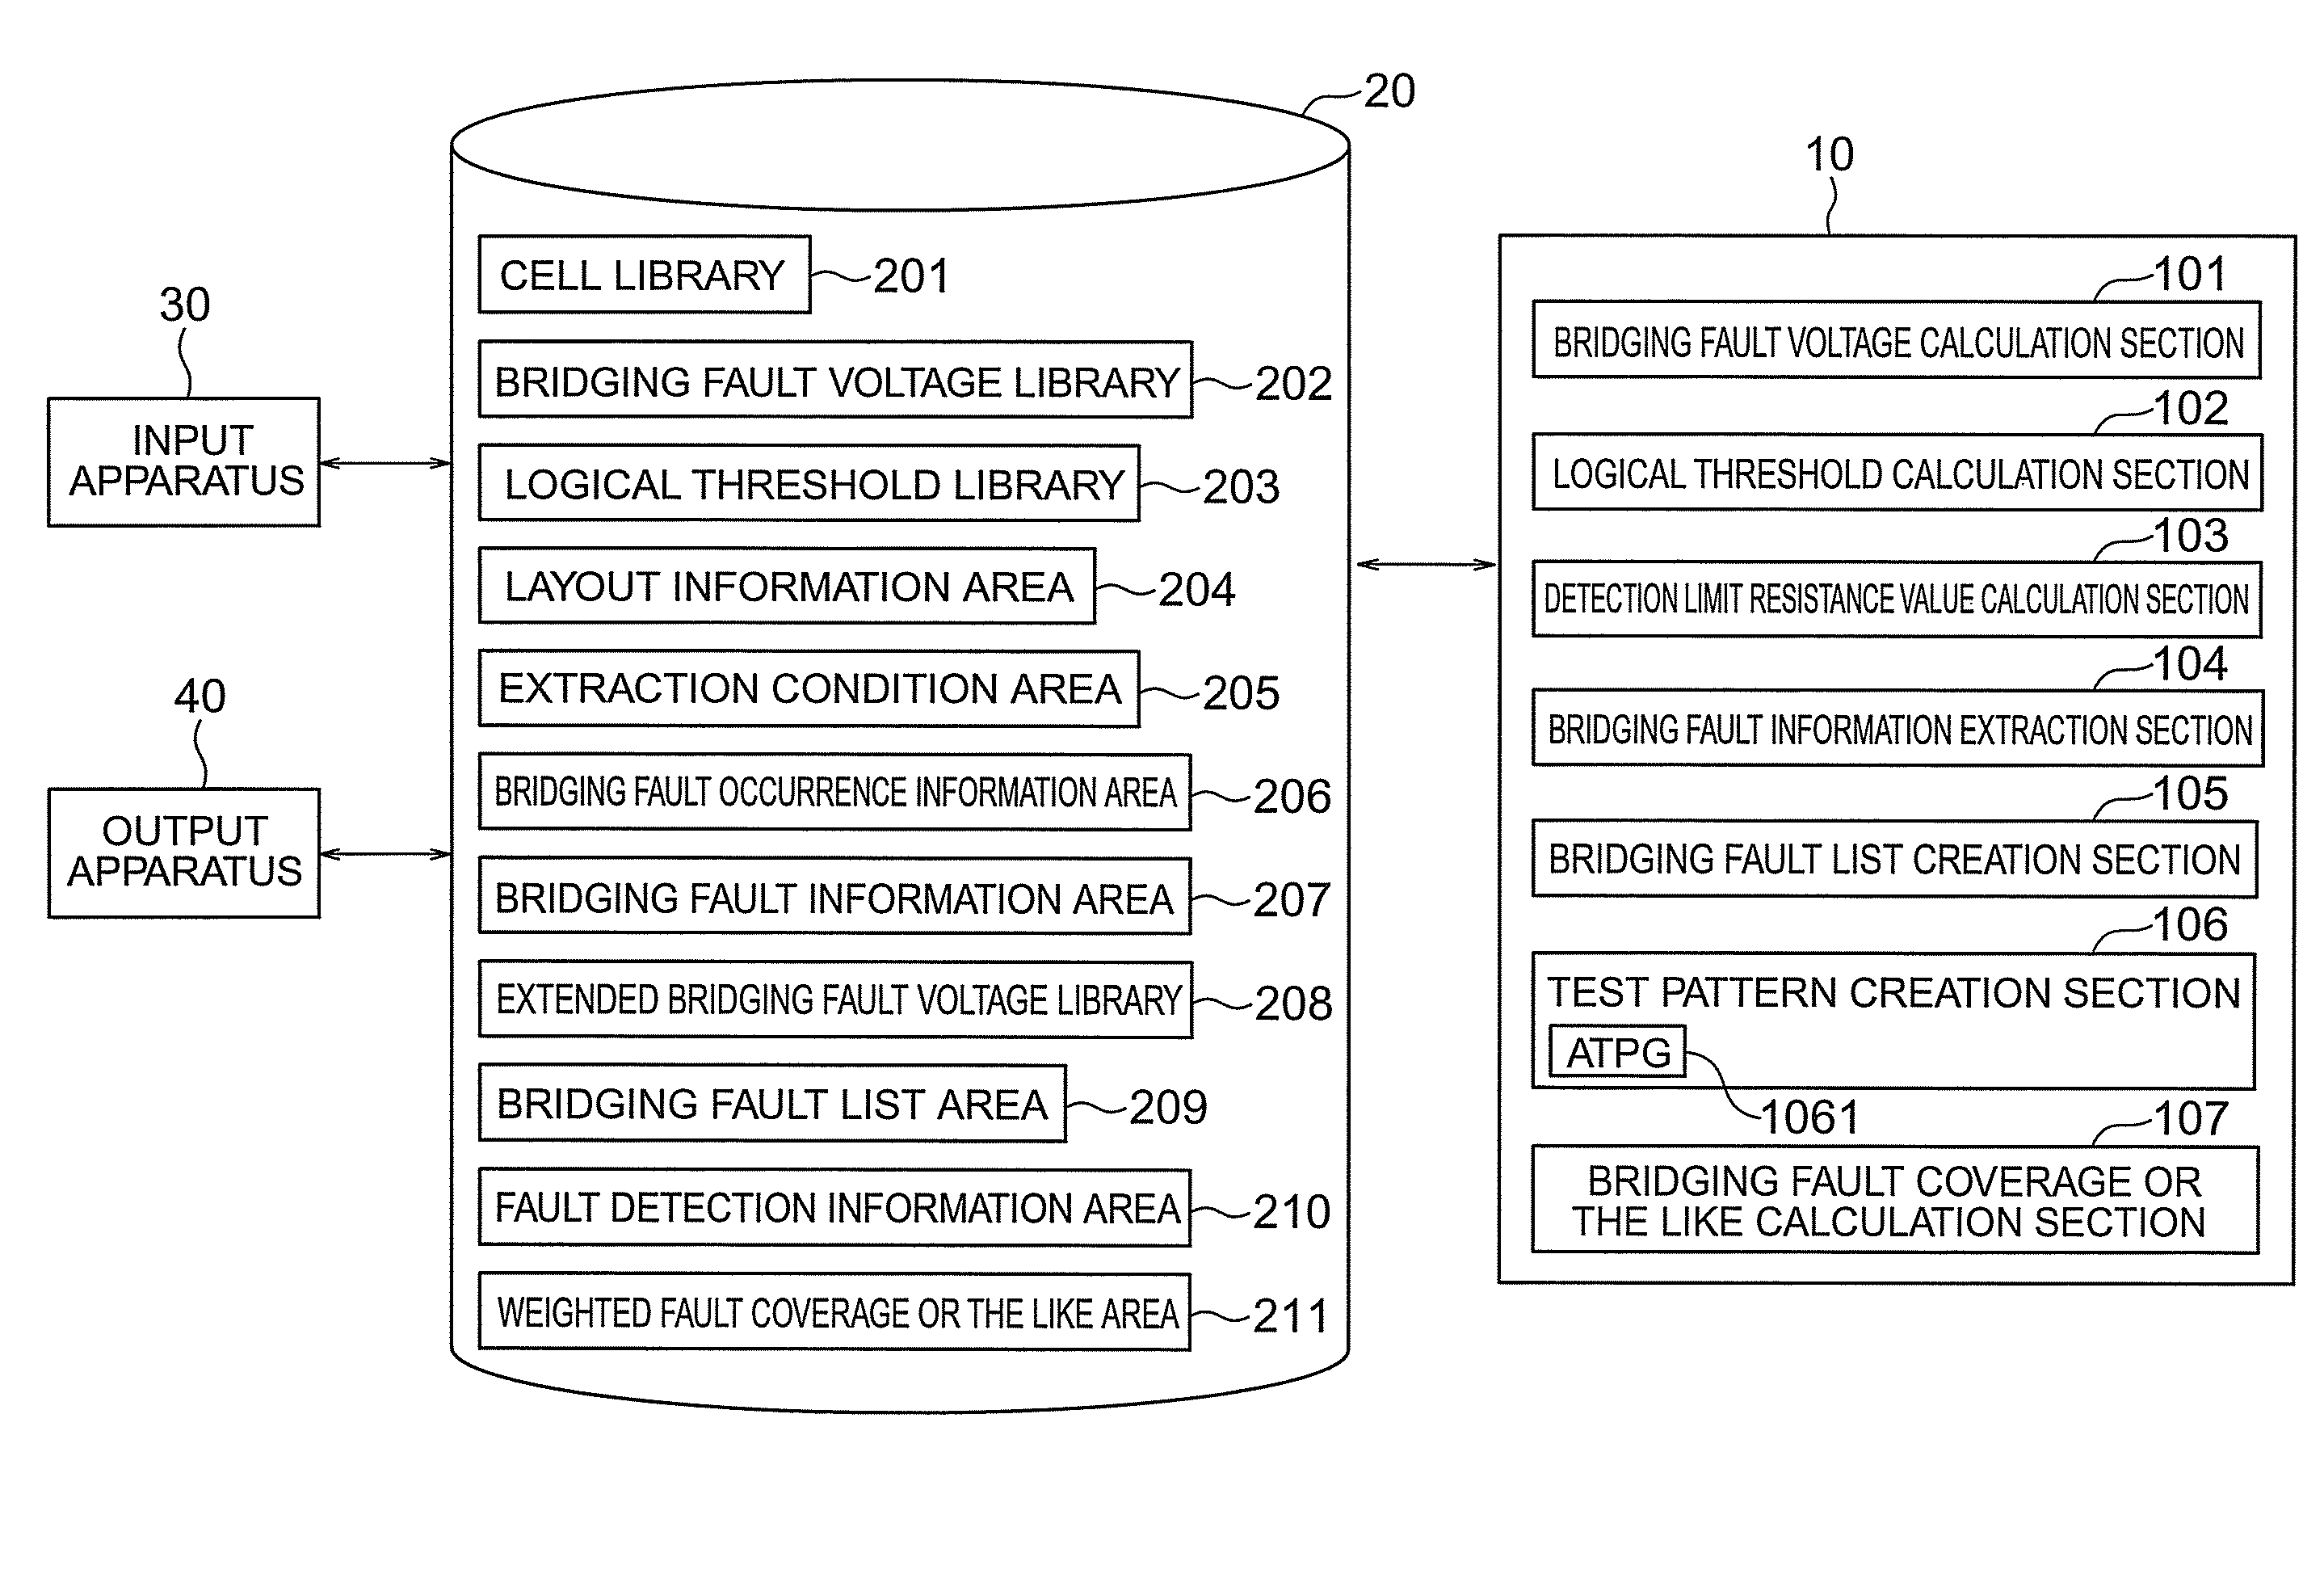 Apparatus for creating test pattern and calculating fault coverage or the like and method for creating test pattern and calculating fault coverage or the like